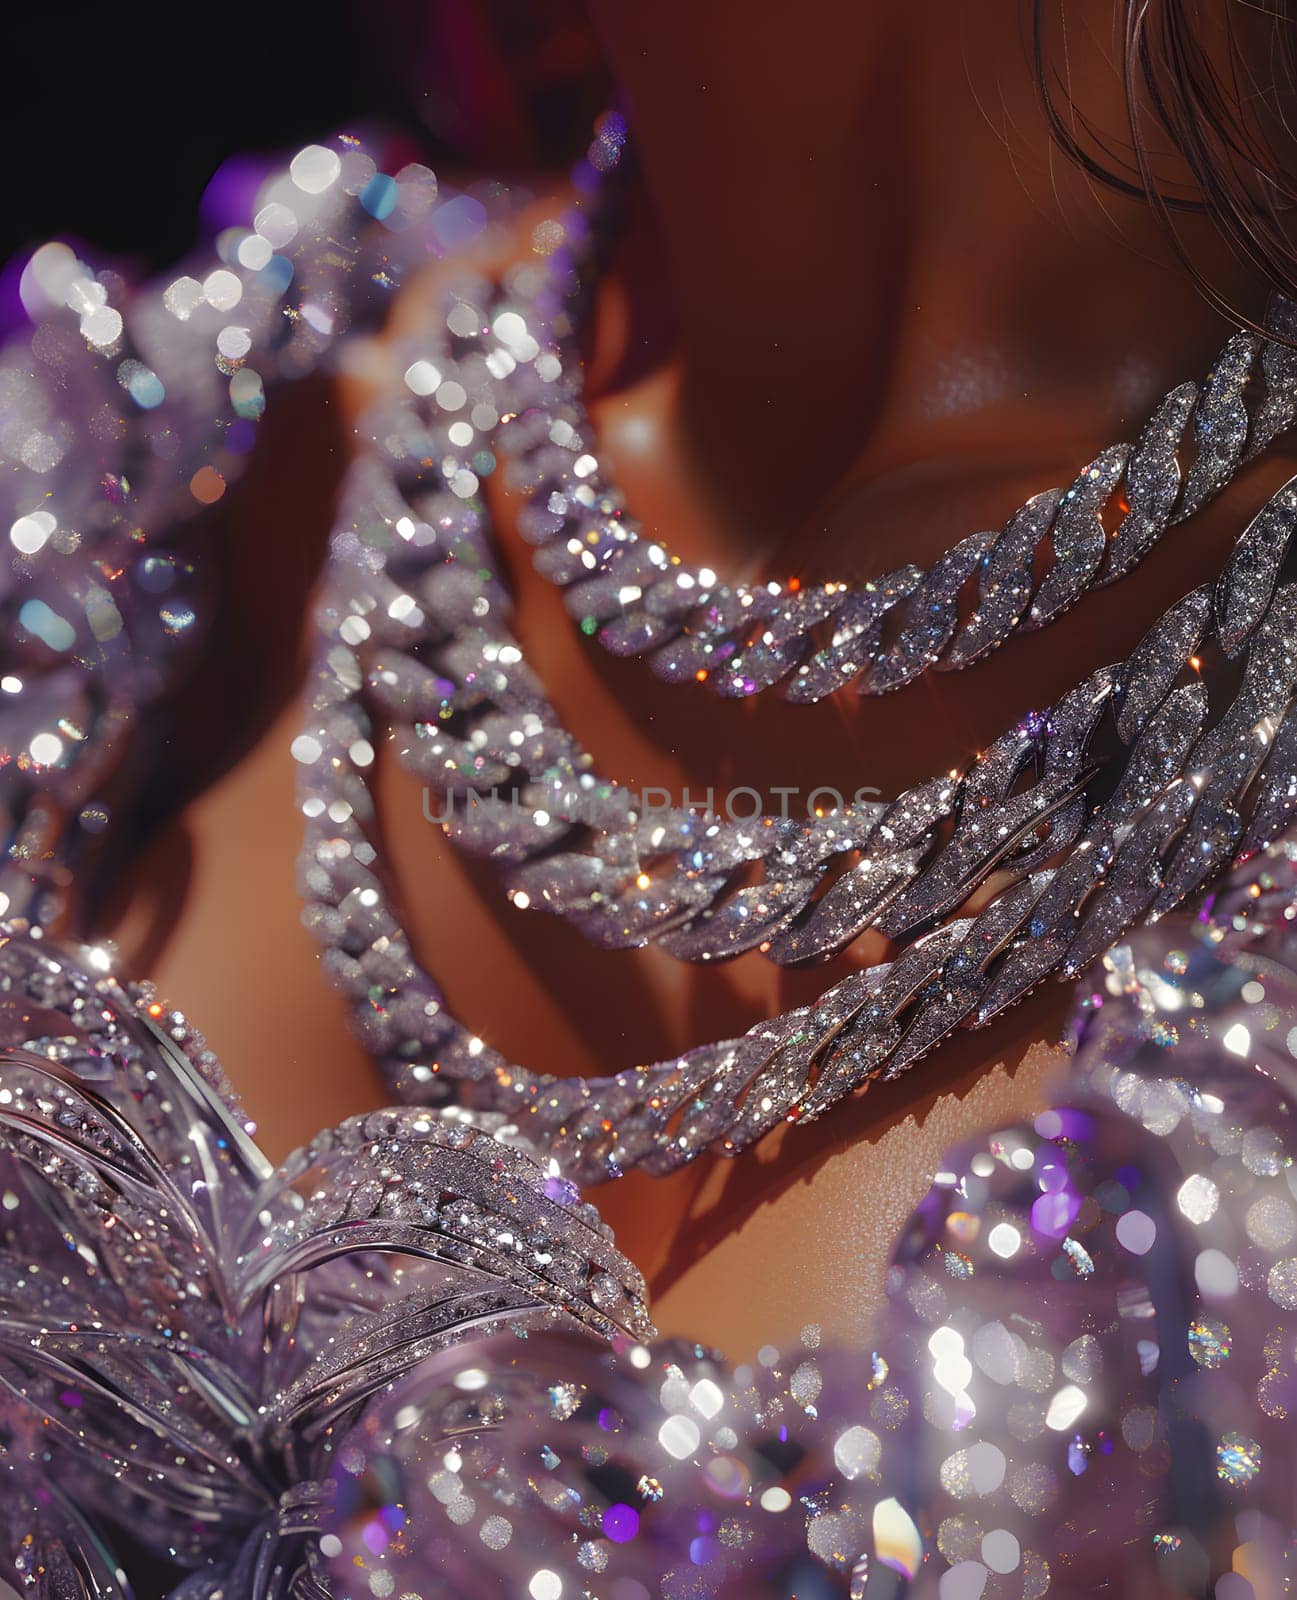 A close up of a woman adorned in purple and violet jewellery, with a statement necklace and earrings. Her hair accessory complements the embellishments, creating an artistic pattern at the event